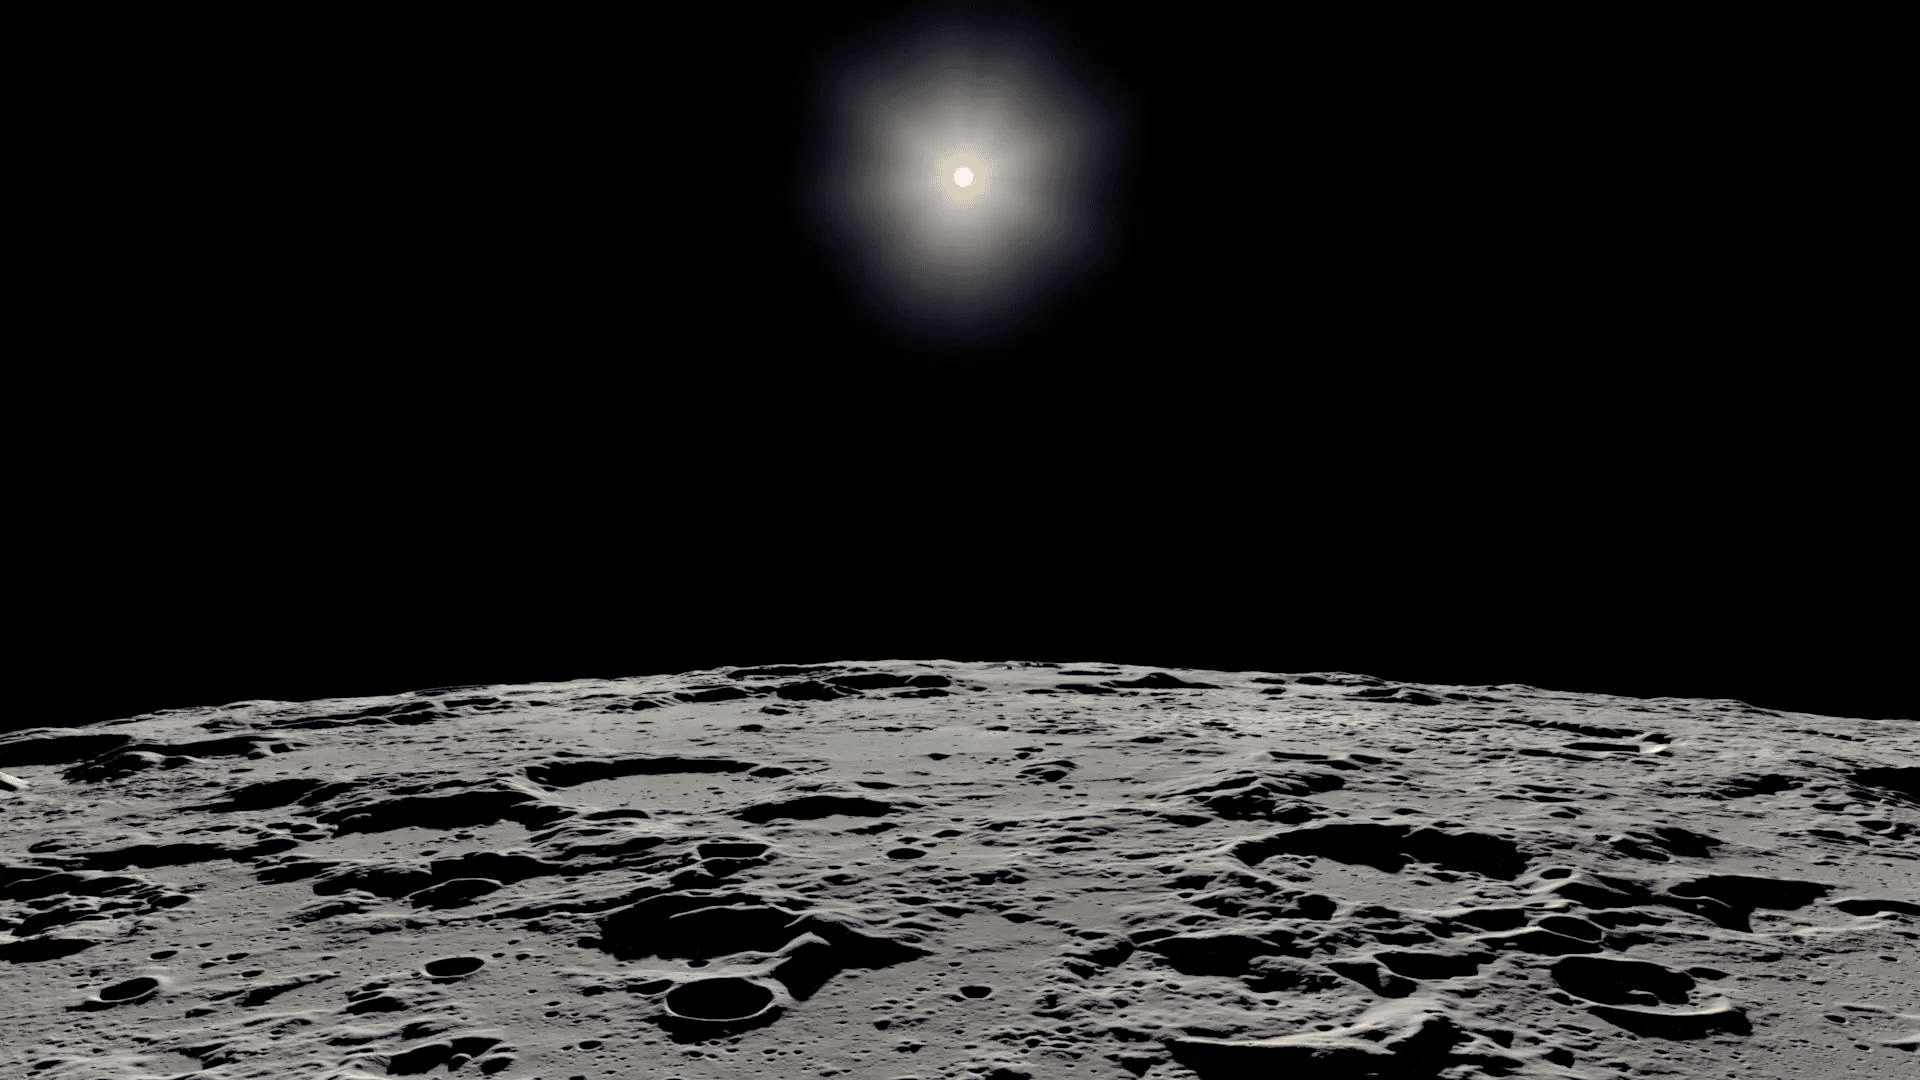 View of the Fun from the Moon